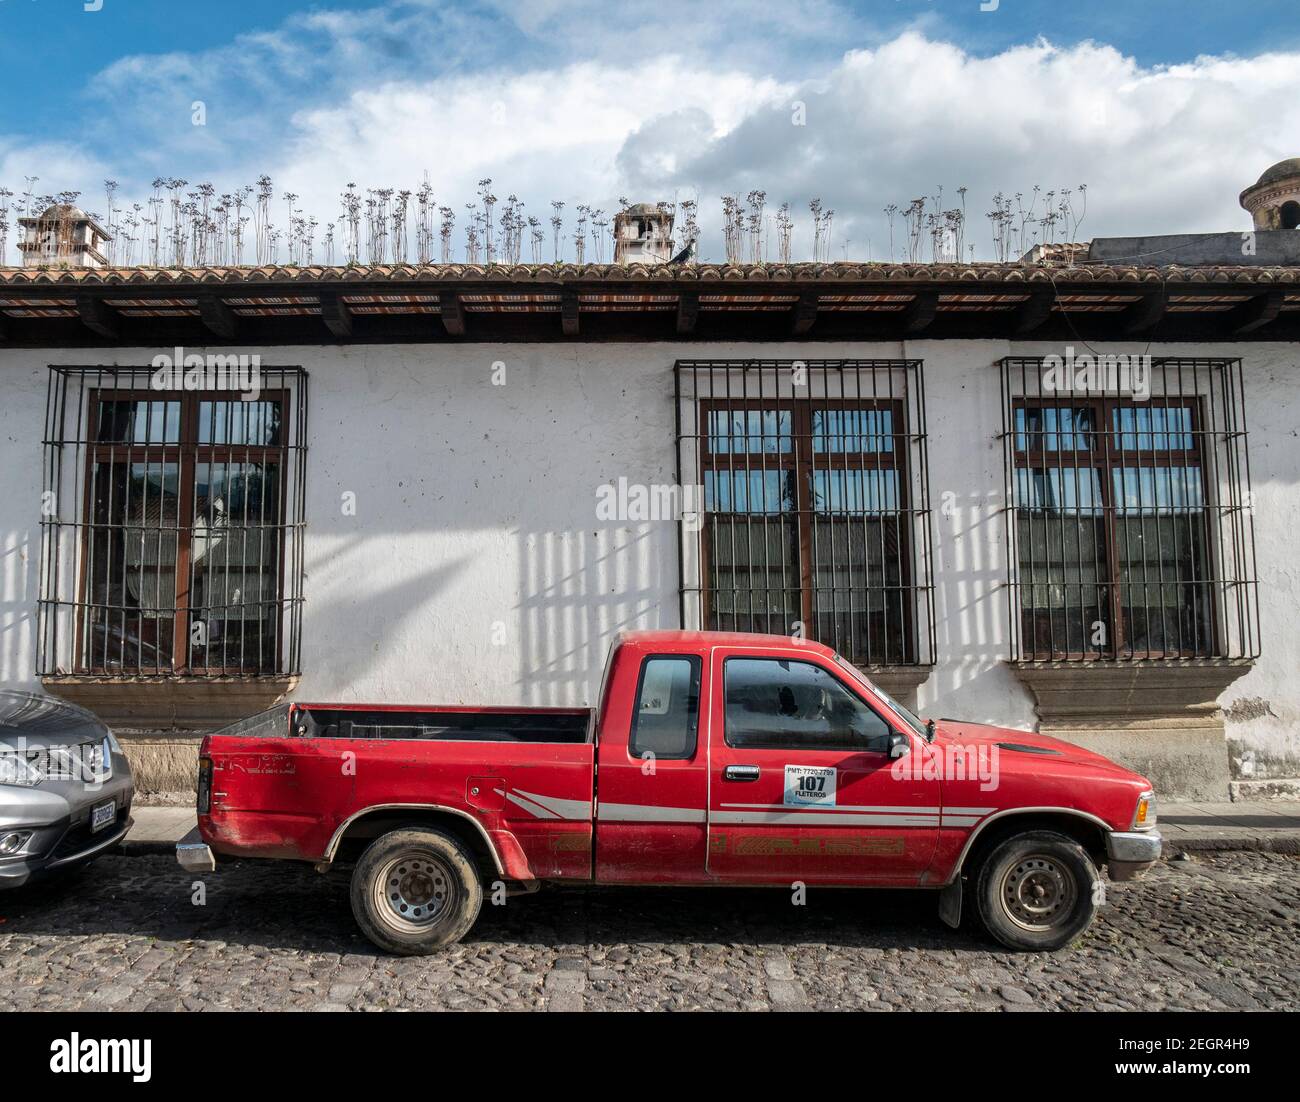 Guatemala, Antigua - May 26, 2019 - Old red pickup truck in front of colonial style house with rod iron bars on windows Stock Photo